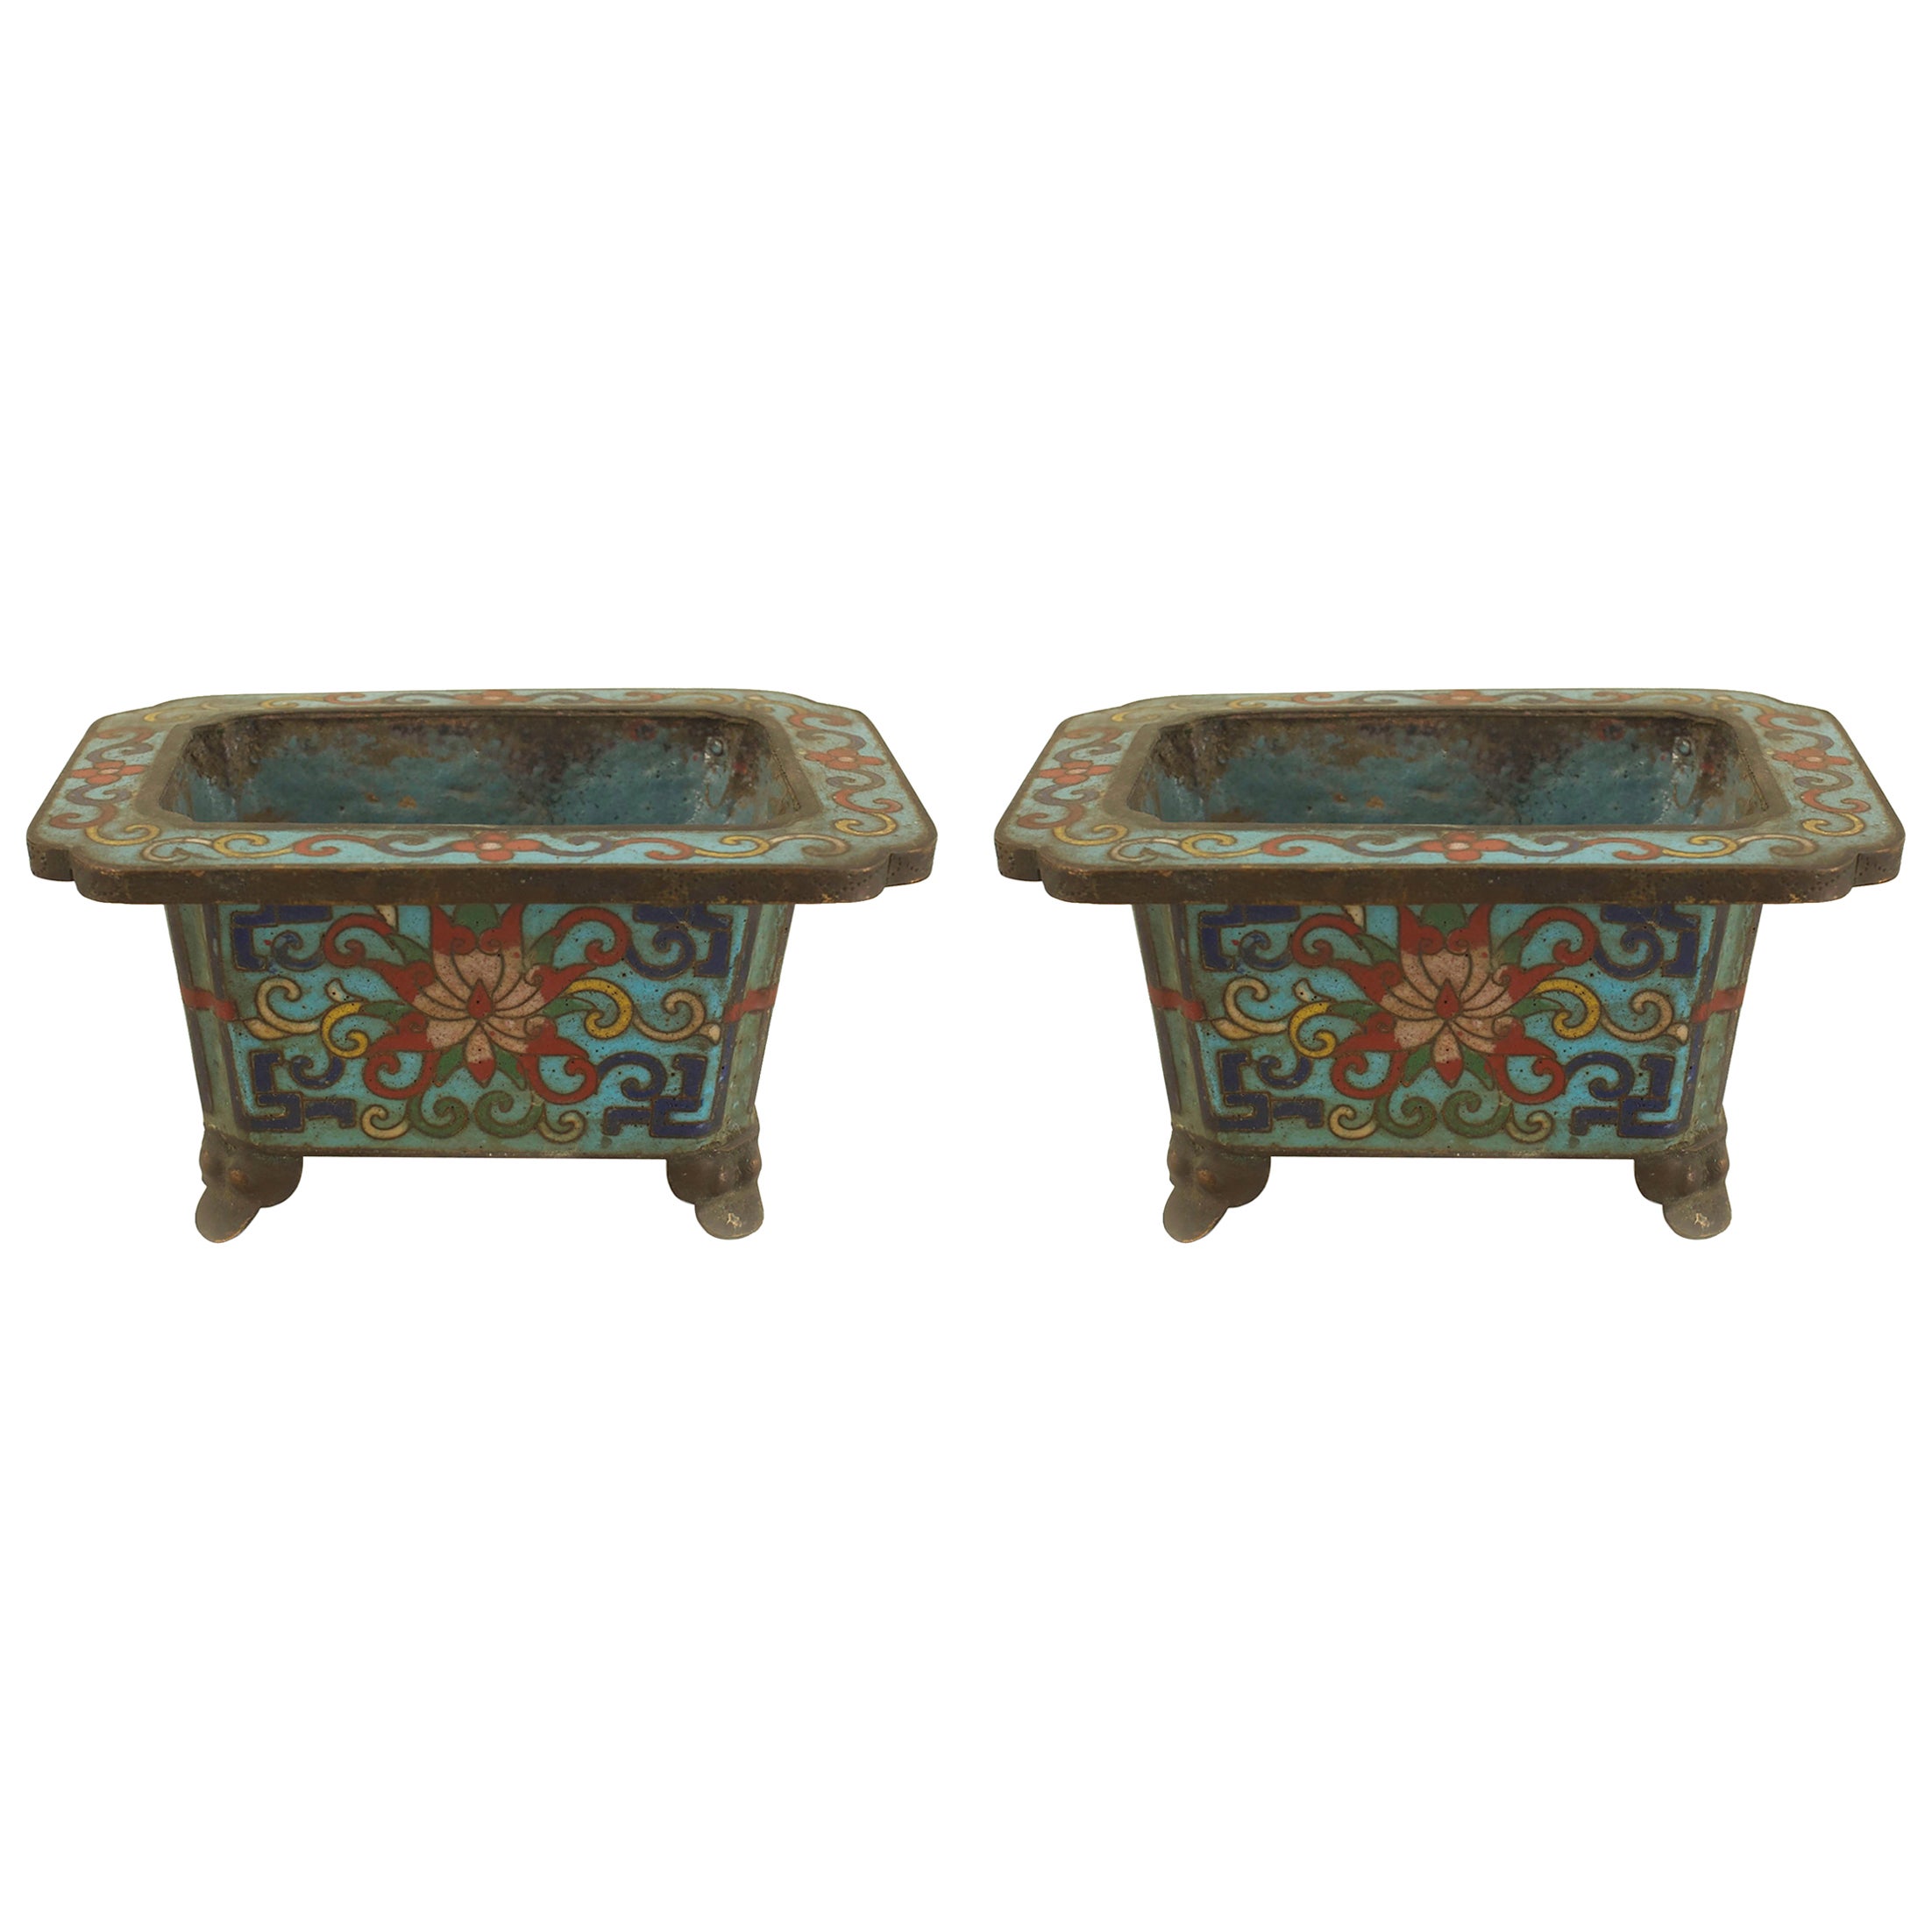 Pair of Chinese Cloisonne Pots with Stands